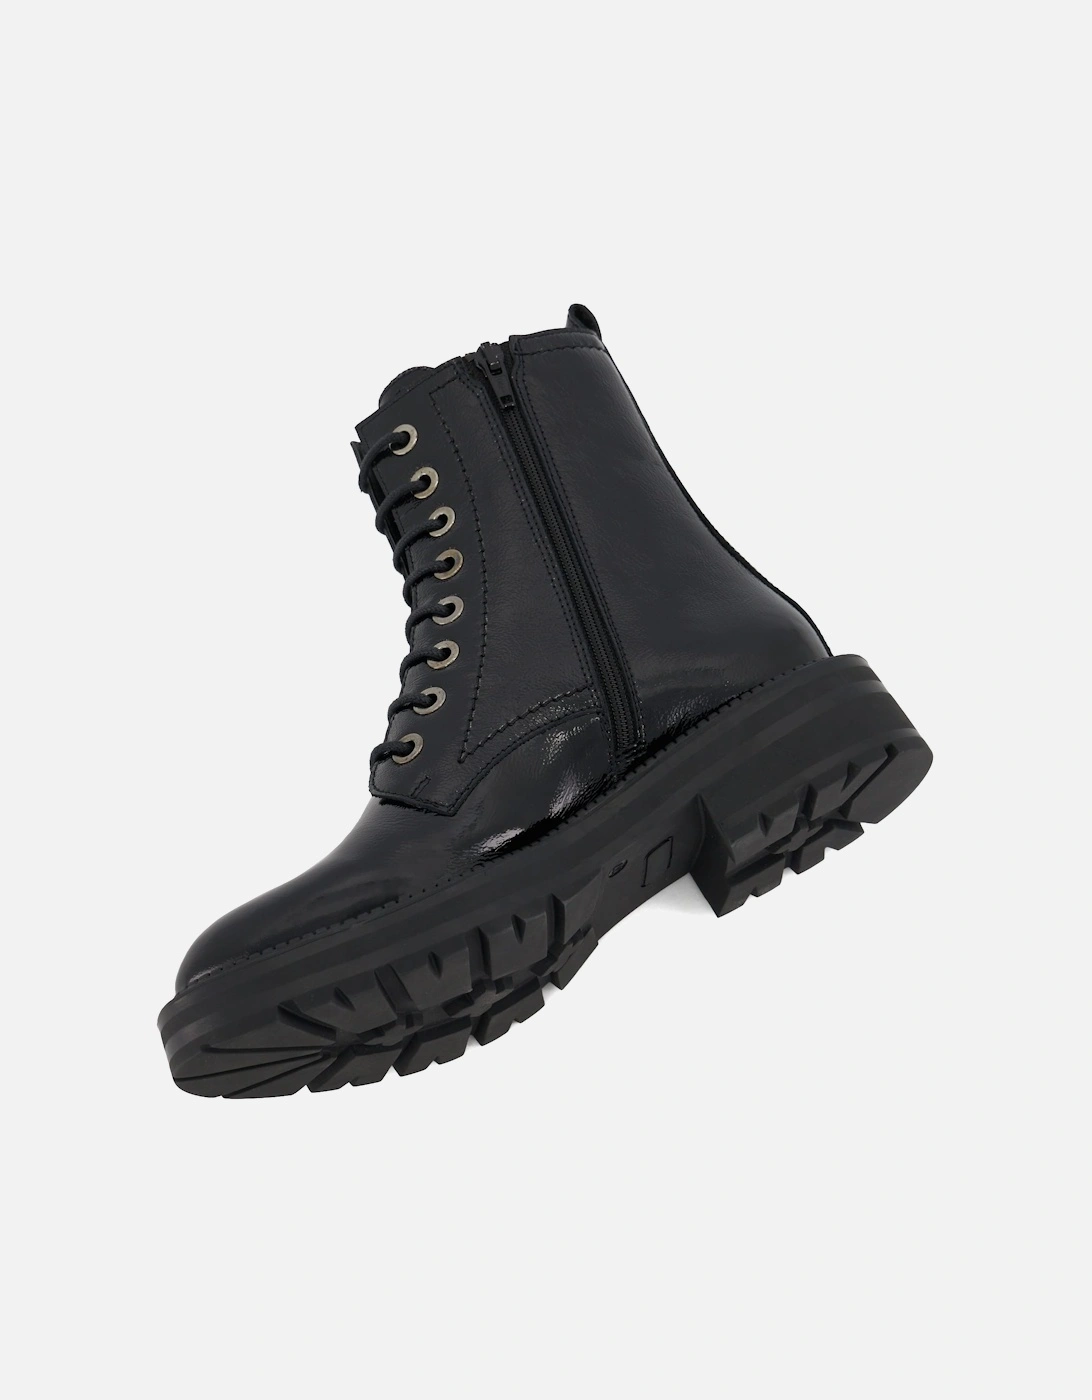 Ladies Press - Cleated-Sole Hiker Boots